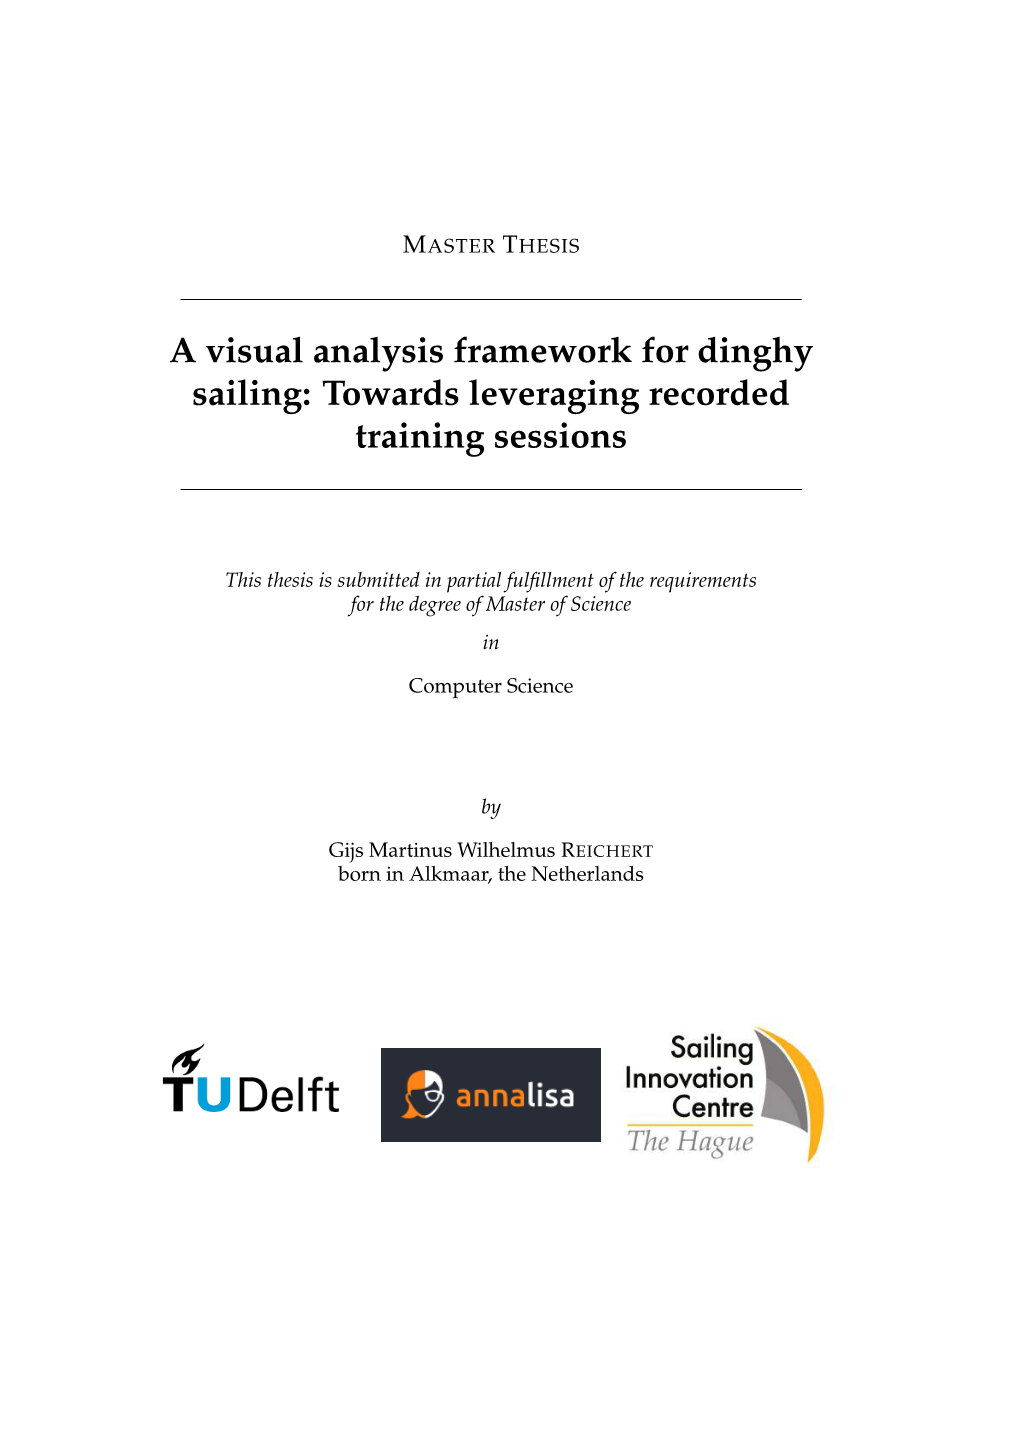 A Visual Analysis Framework for Dinghy Sailing: Towards Leveraging Recorded Training Sessions